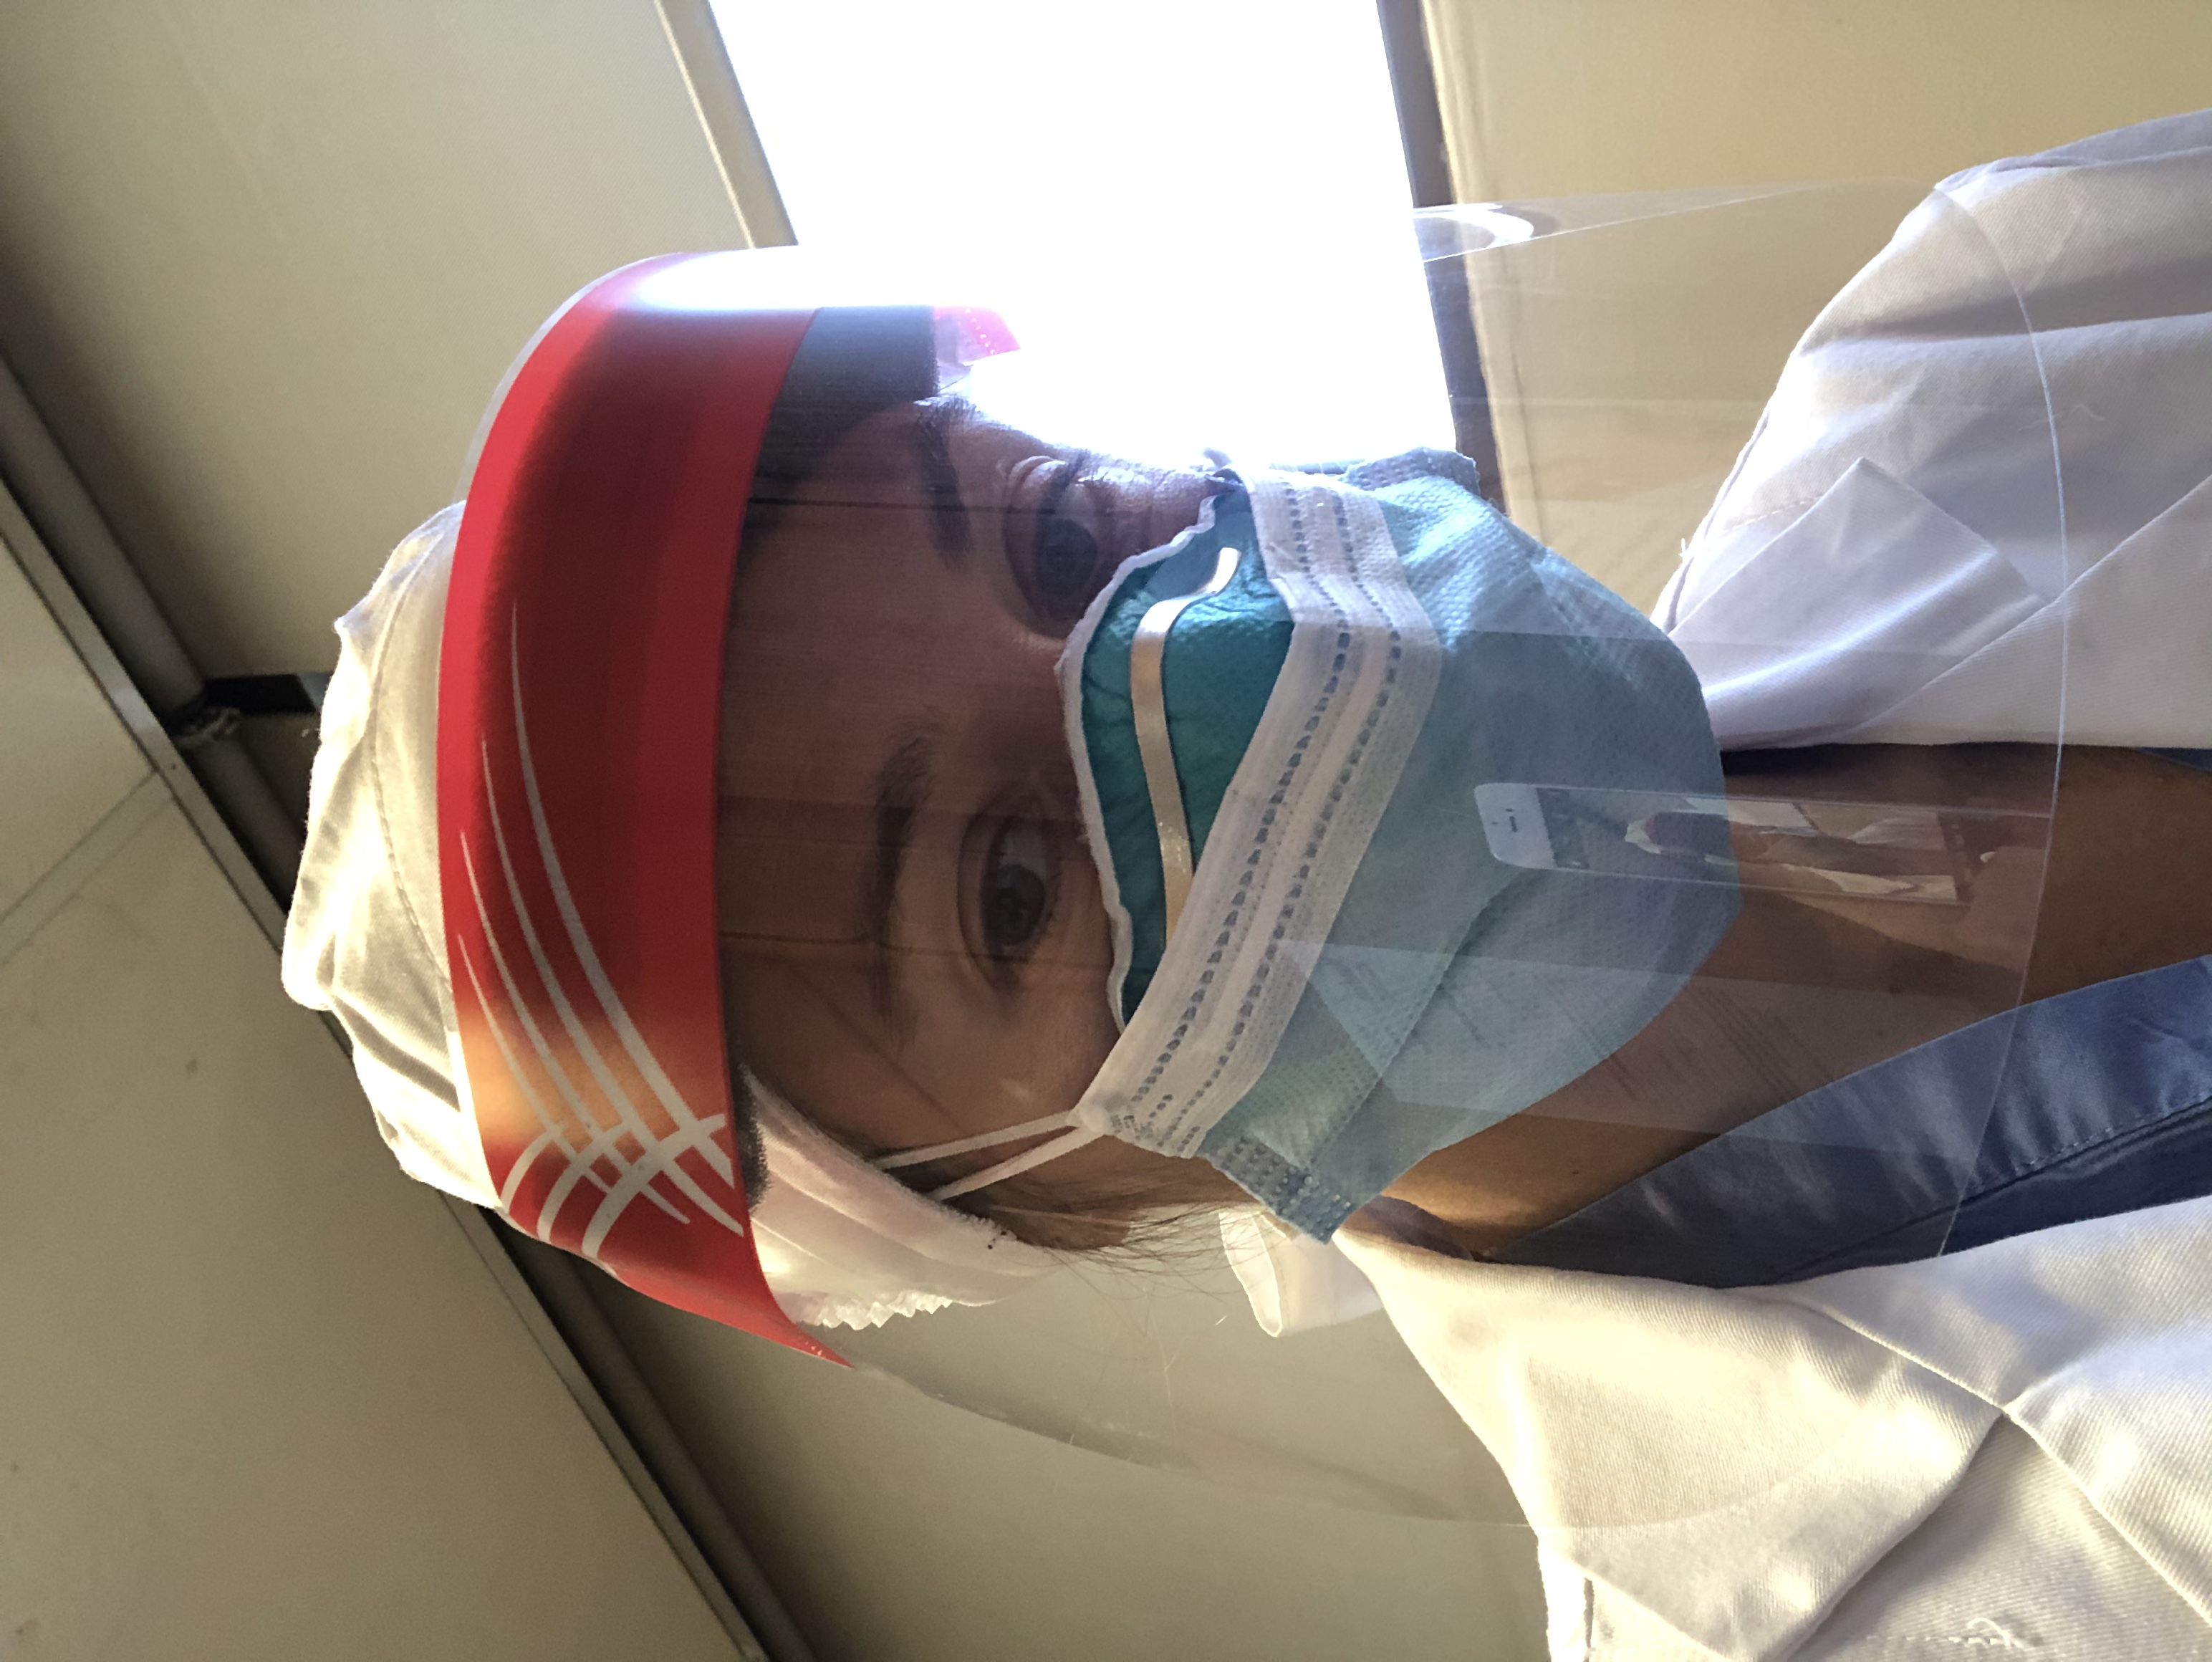 Dr. Goloborodka, dressed in personal protective equipment at the ER